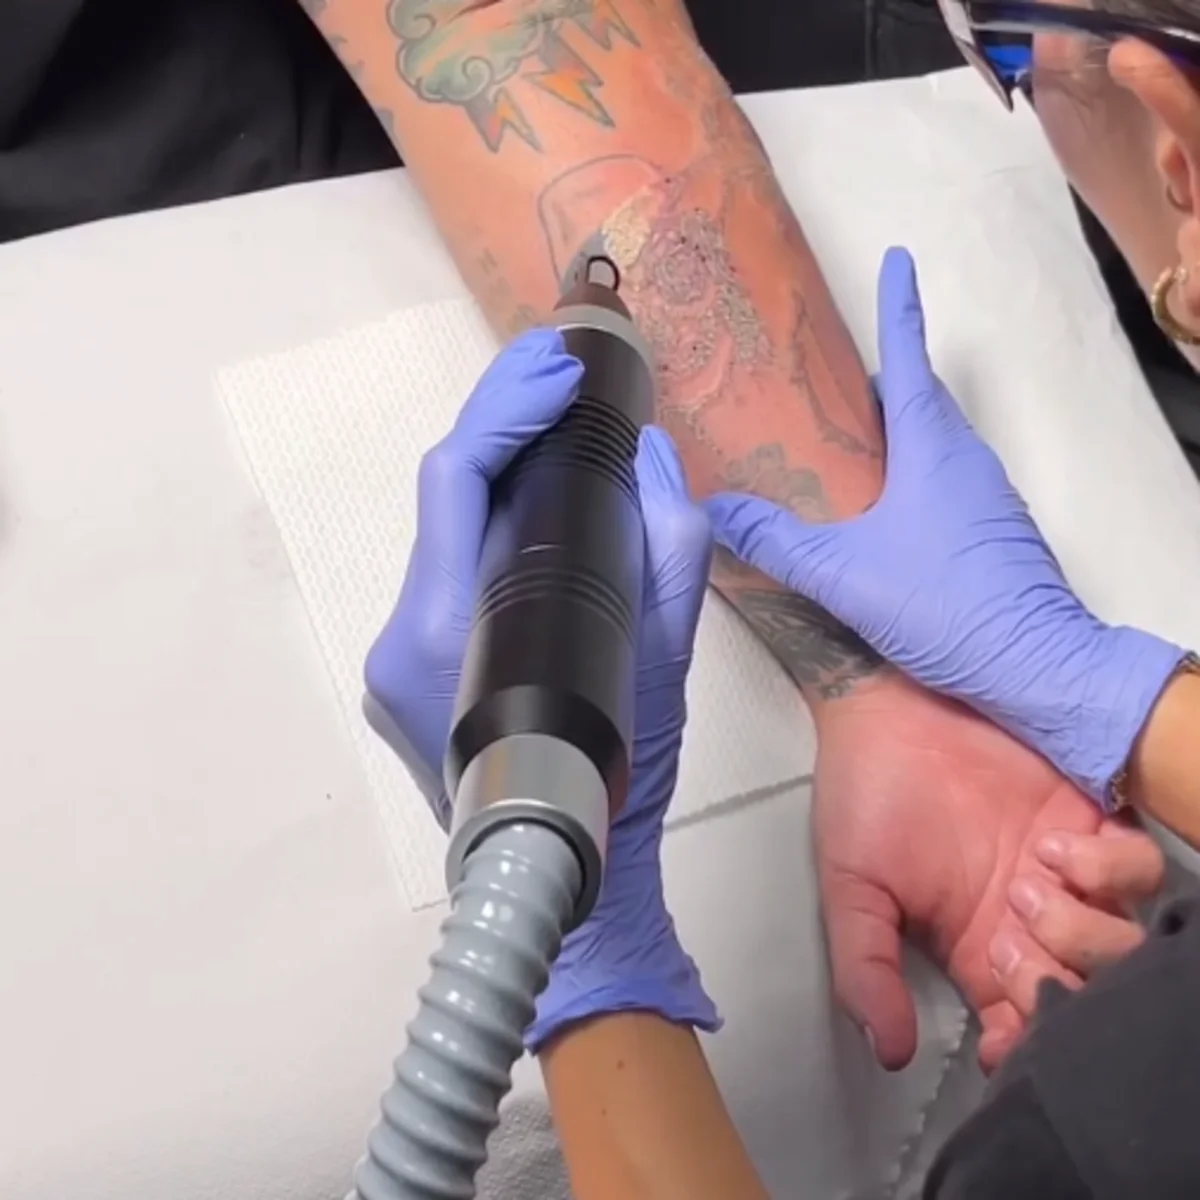 Melbourne Tattoo Removal